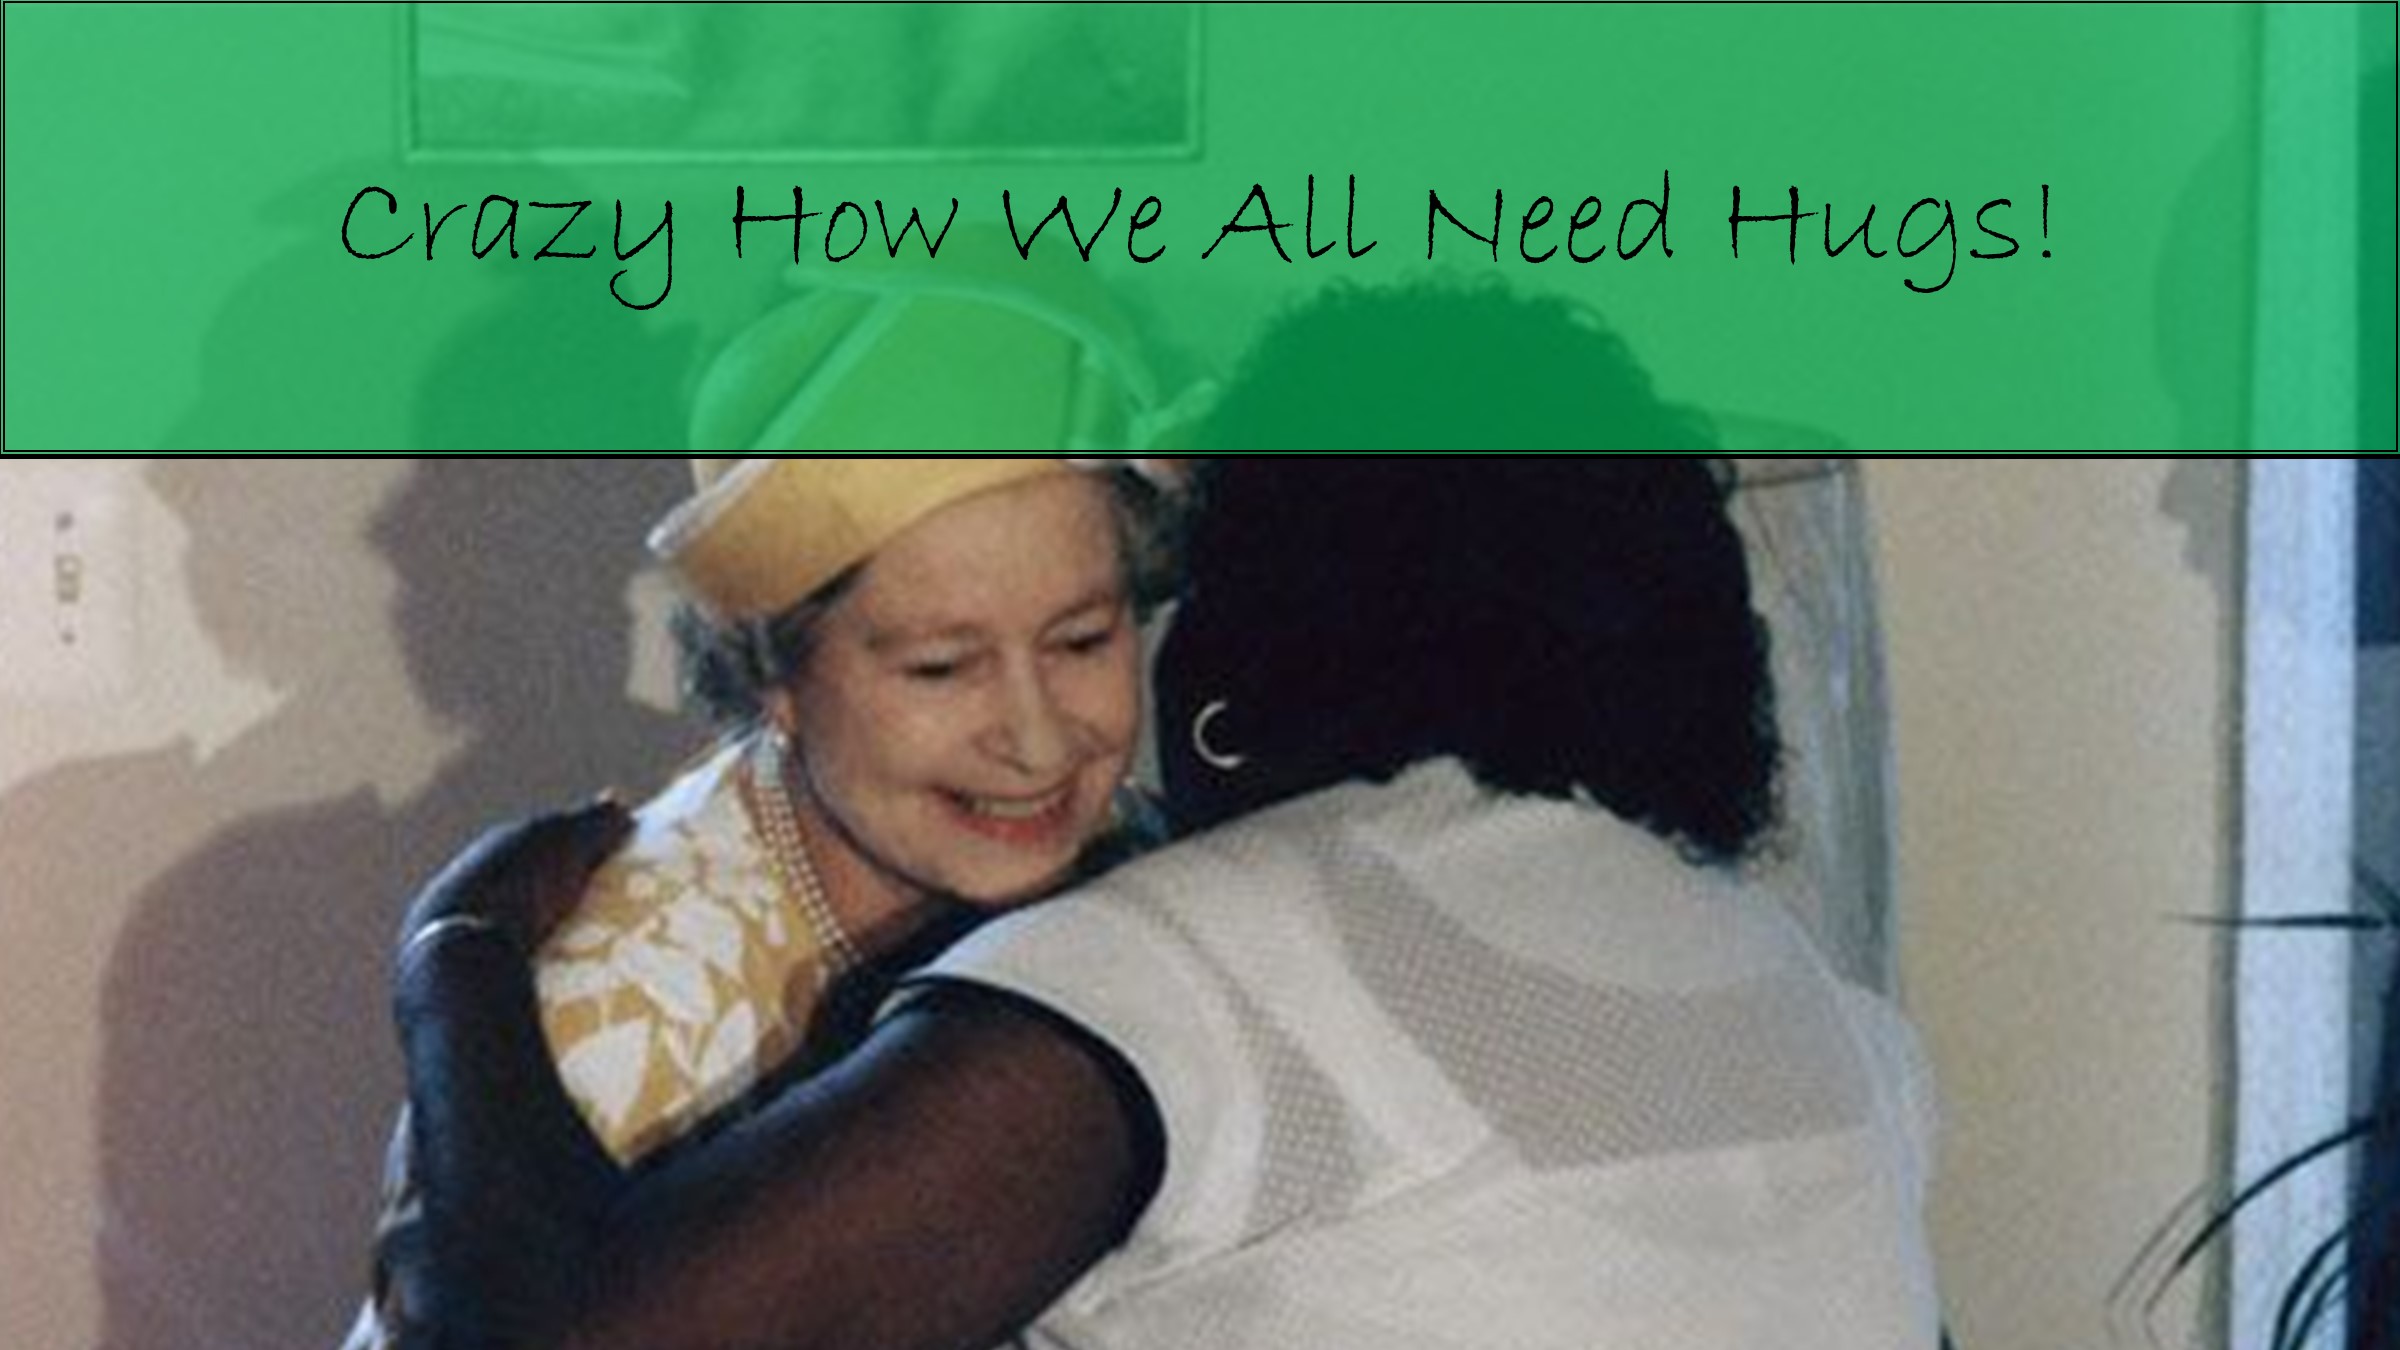 Crazy How We All Need Hugs! (thank you, Queen!)